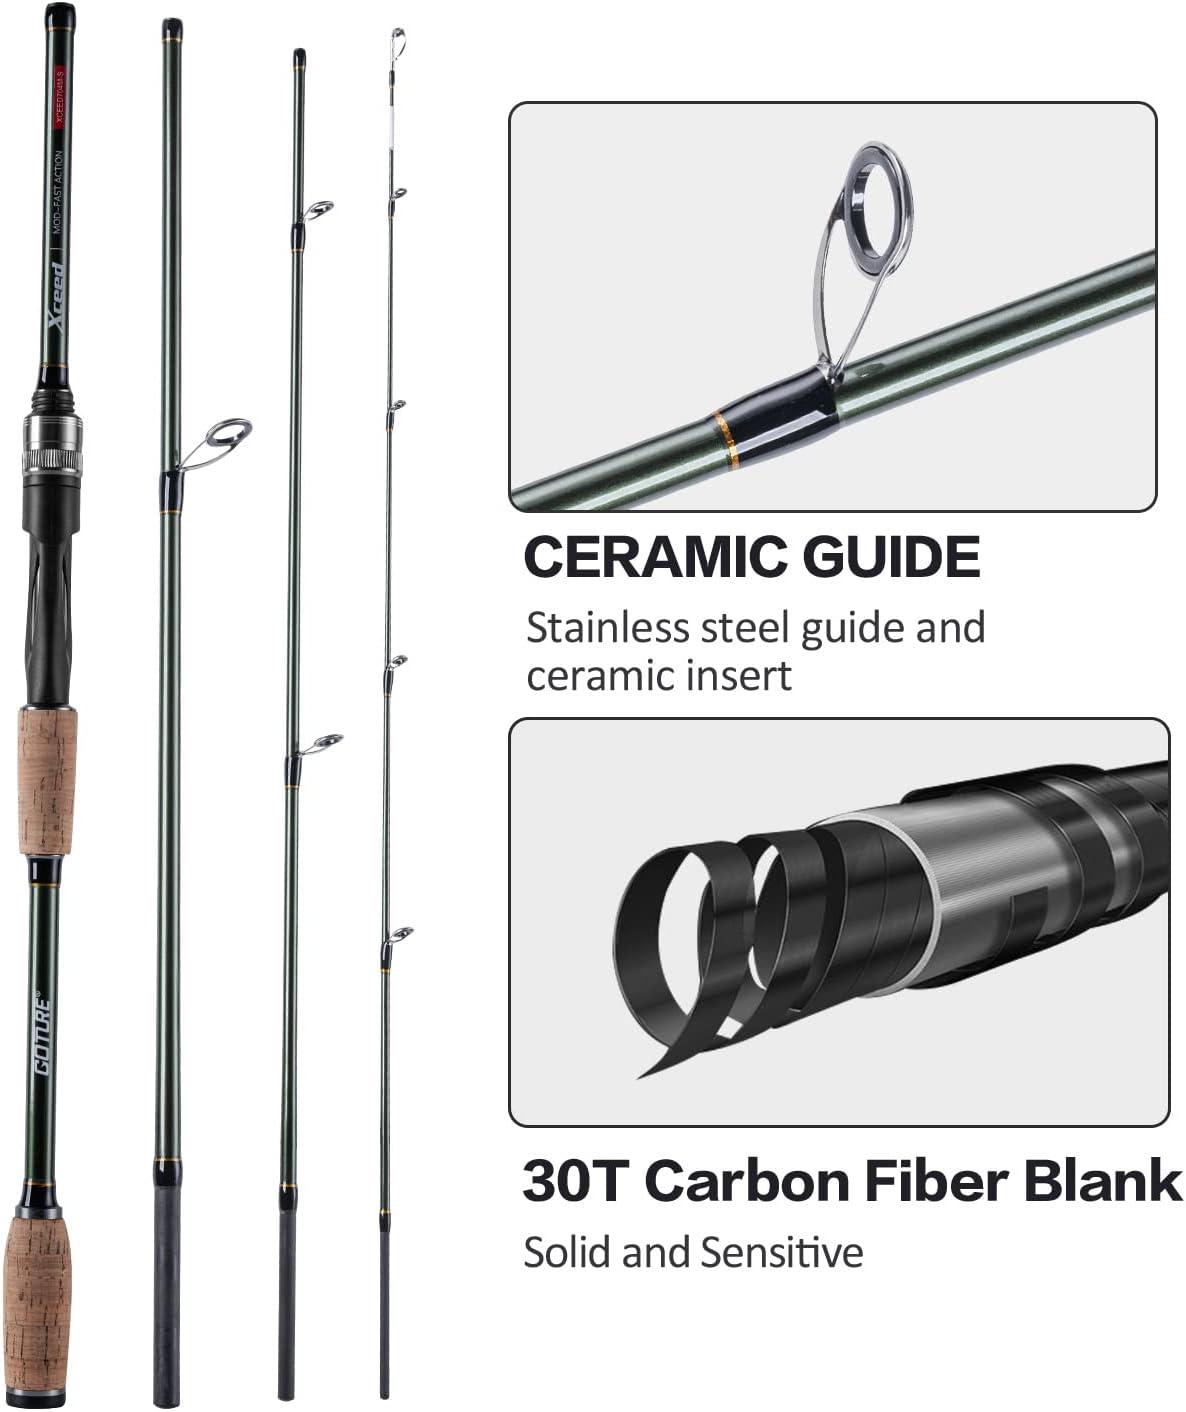 Goture Travel Fishing Rods Review